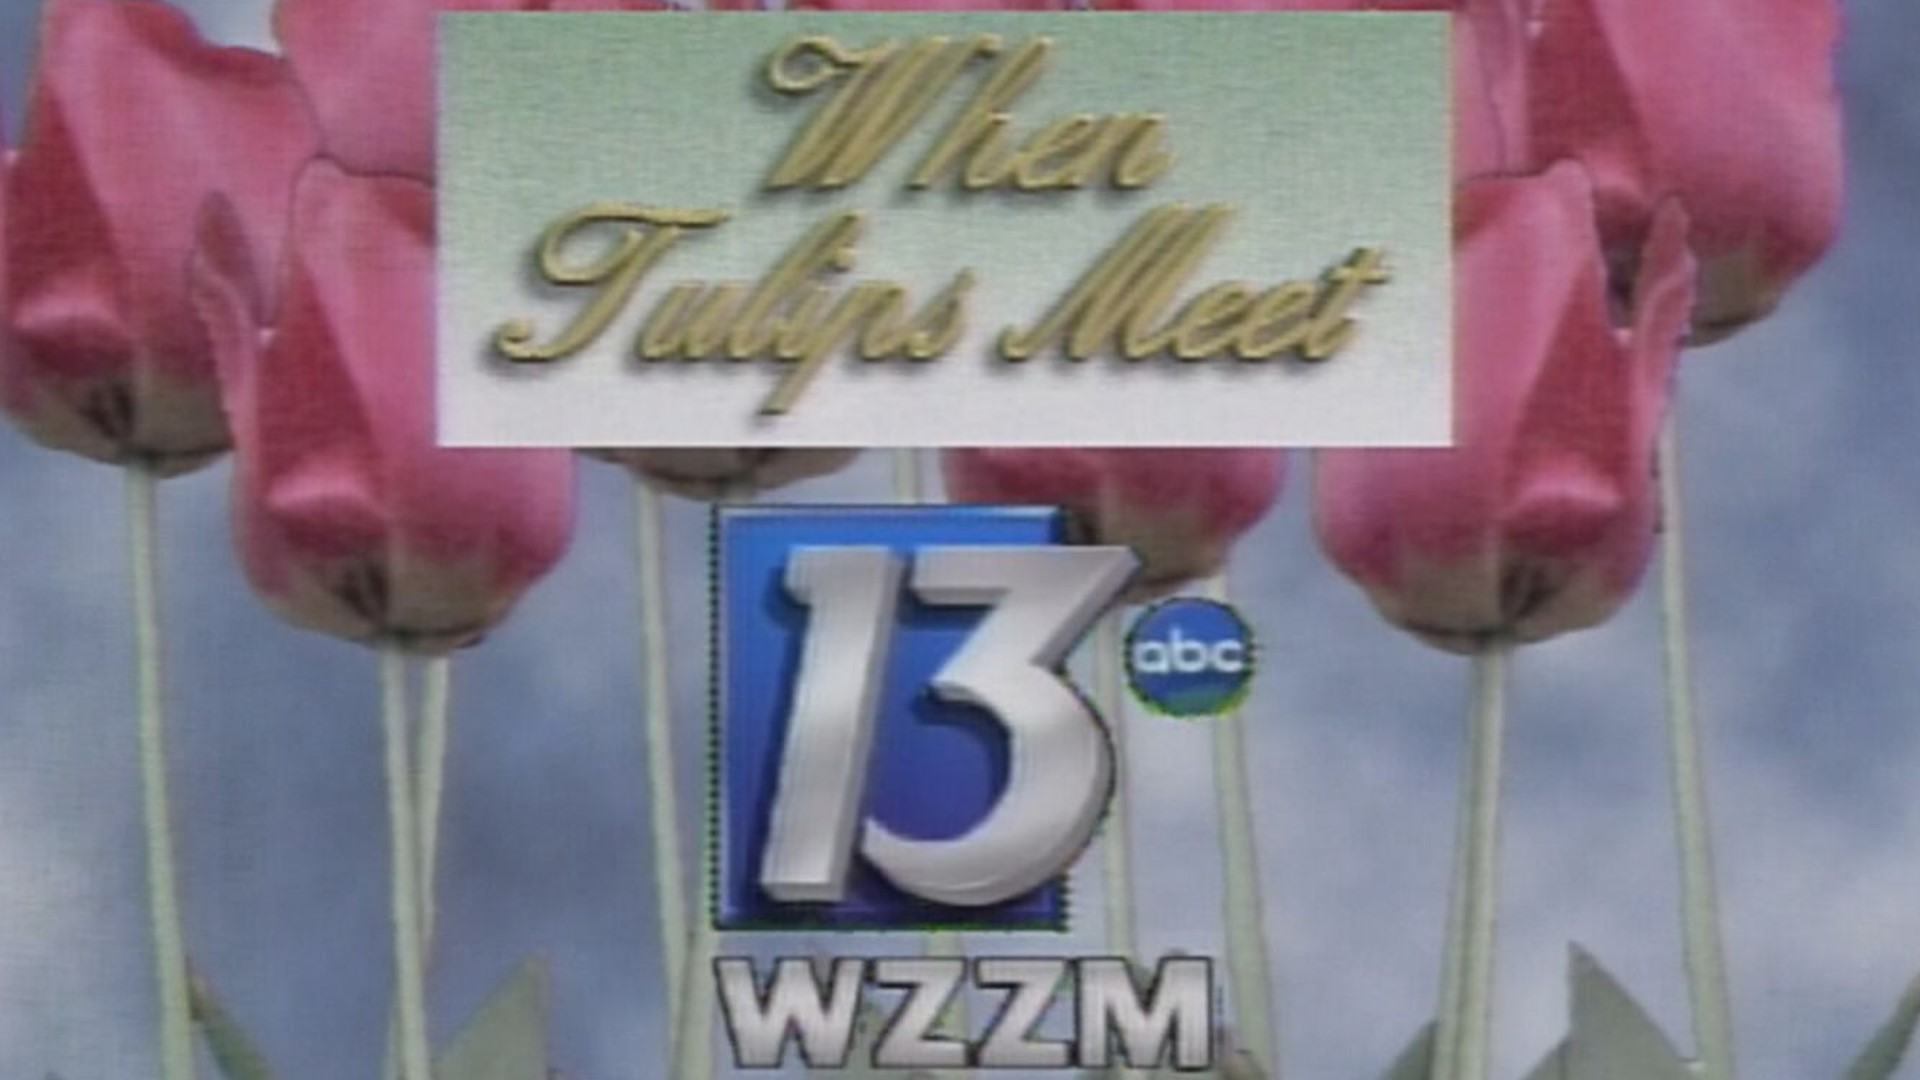 Join Juliet Dragos and Lee Van Ameyde as they showcase Holland's famous Tulip Time Festival in this 1995 special titled "When Tulips Meet".